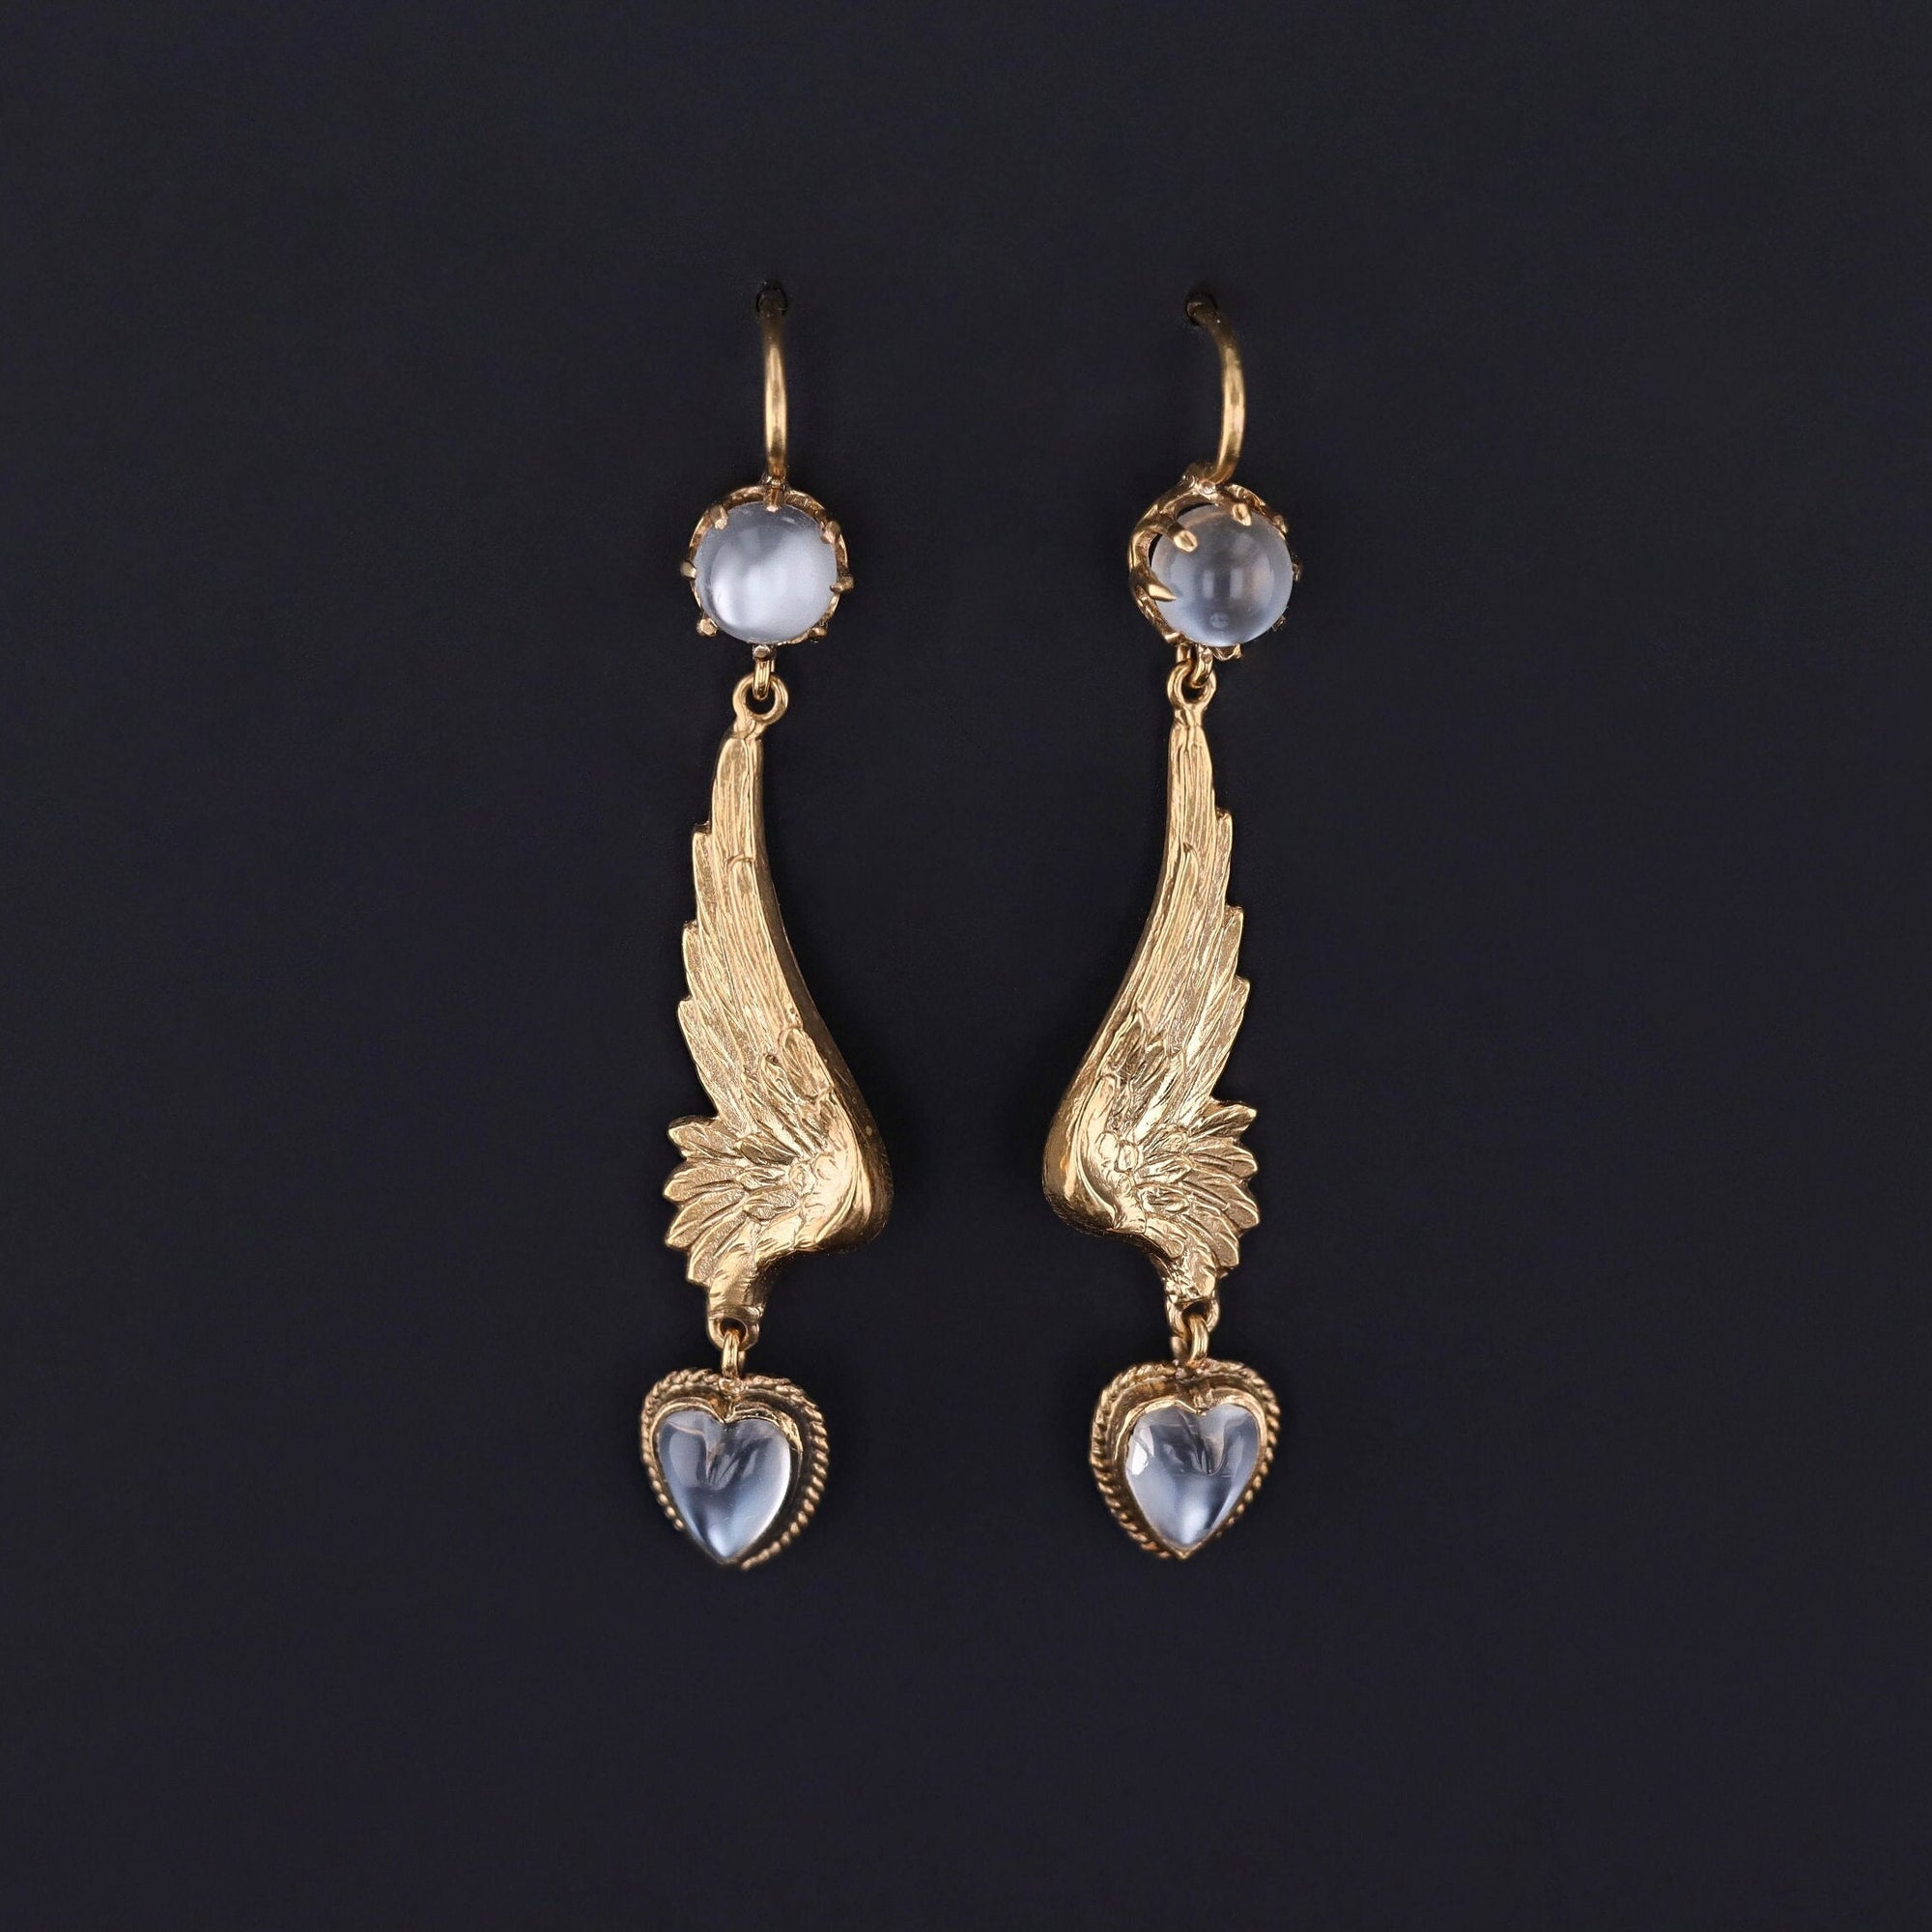 Antique Moonstone Heart Wing Conversion Earrings of 14k Gold